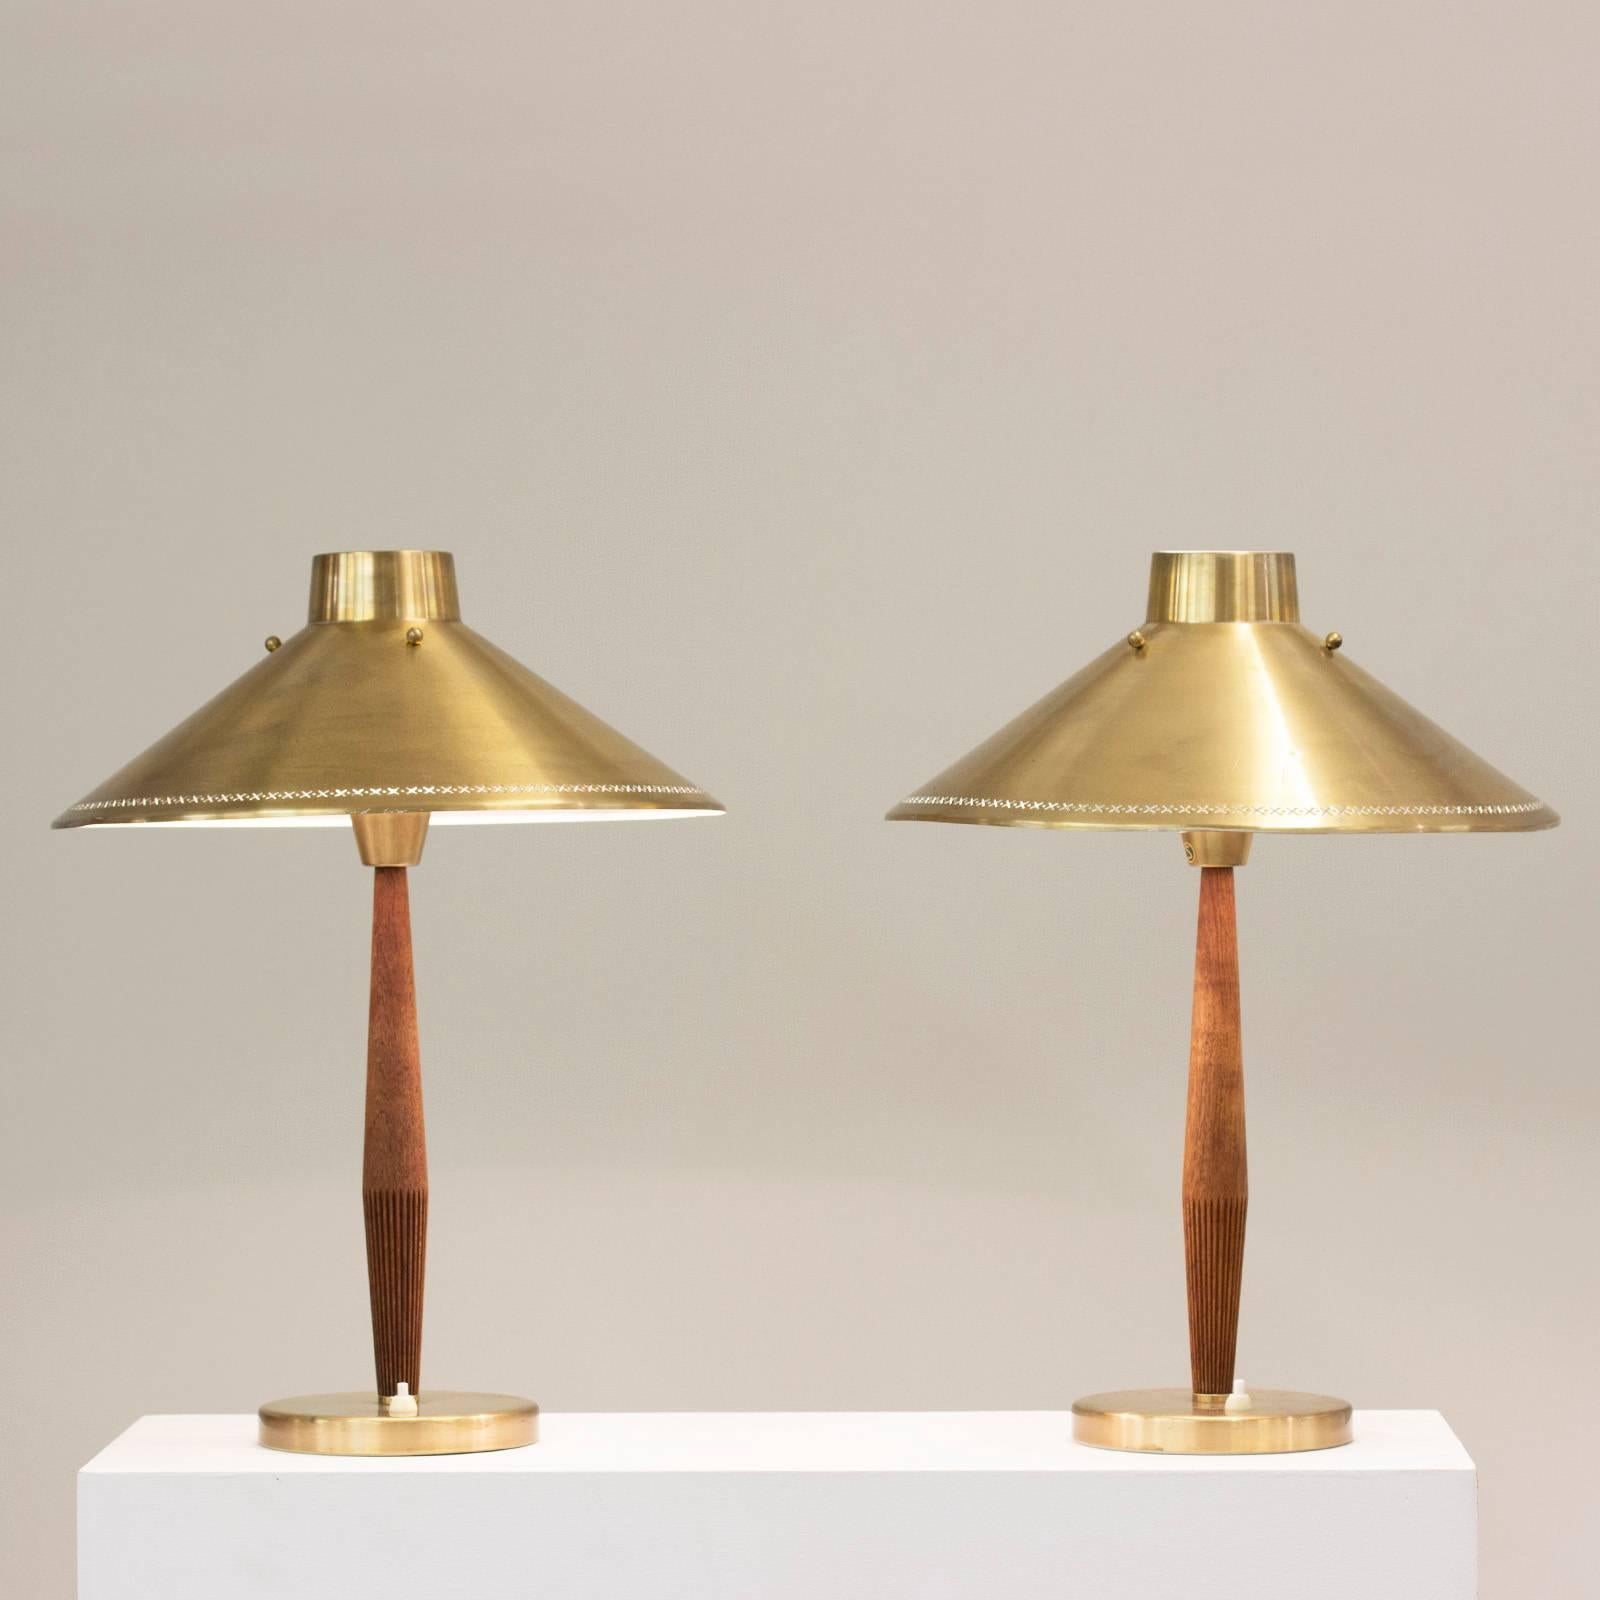 Pair of beautiful table lamps by Hans Bergström for ASEA, with teak poles with a pattern of carved slits and brass shades with a punched-out pattern around the edges.

The architect Hans Bergström founded the lighting firm Ateljé Lyktan in Åhus in